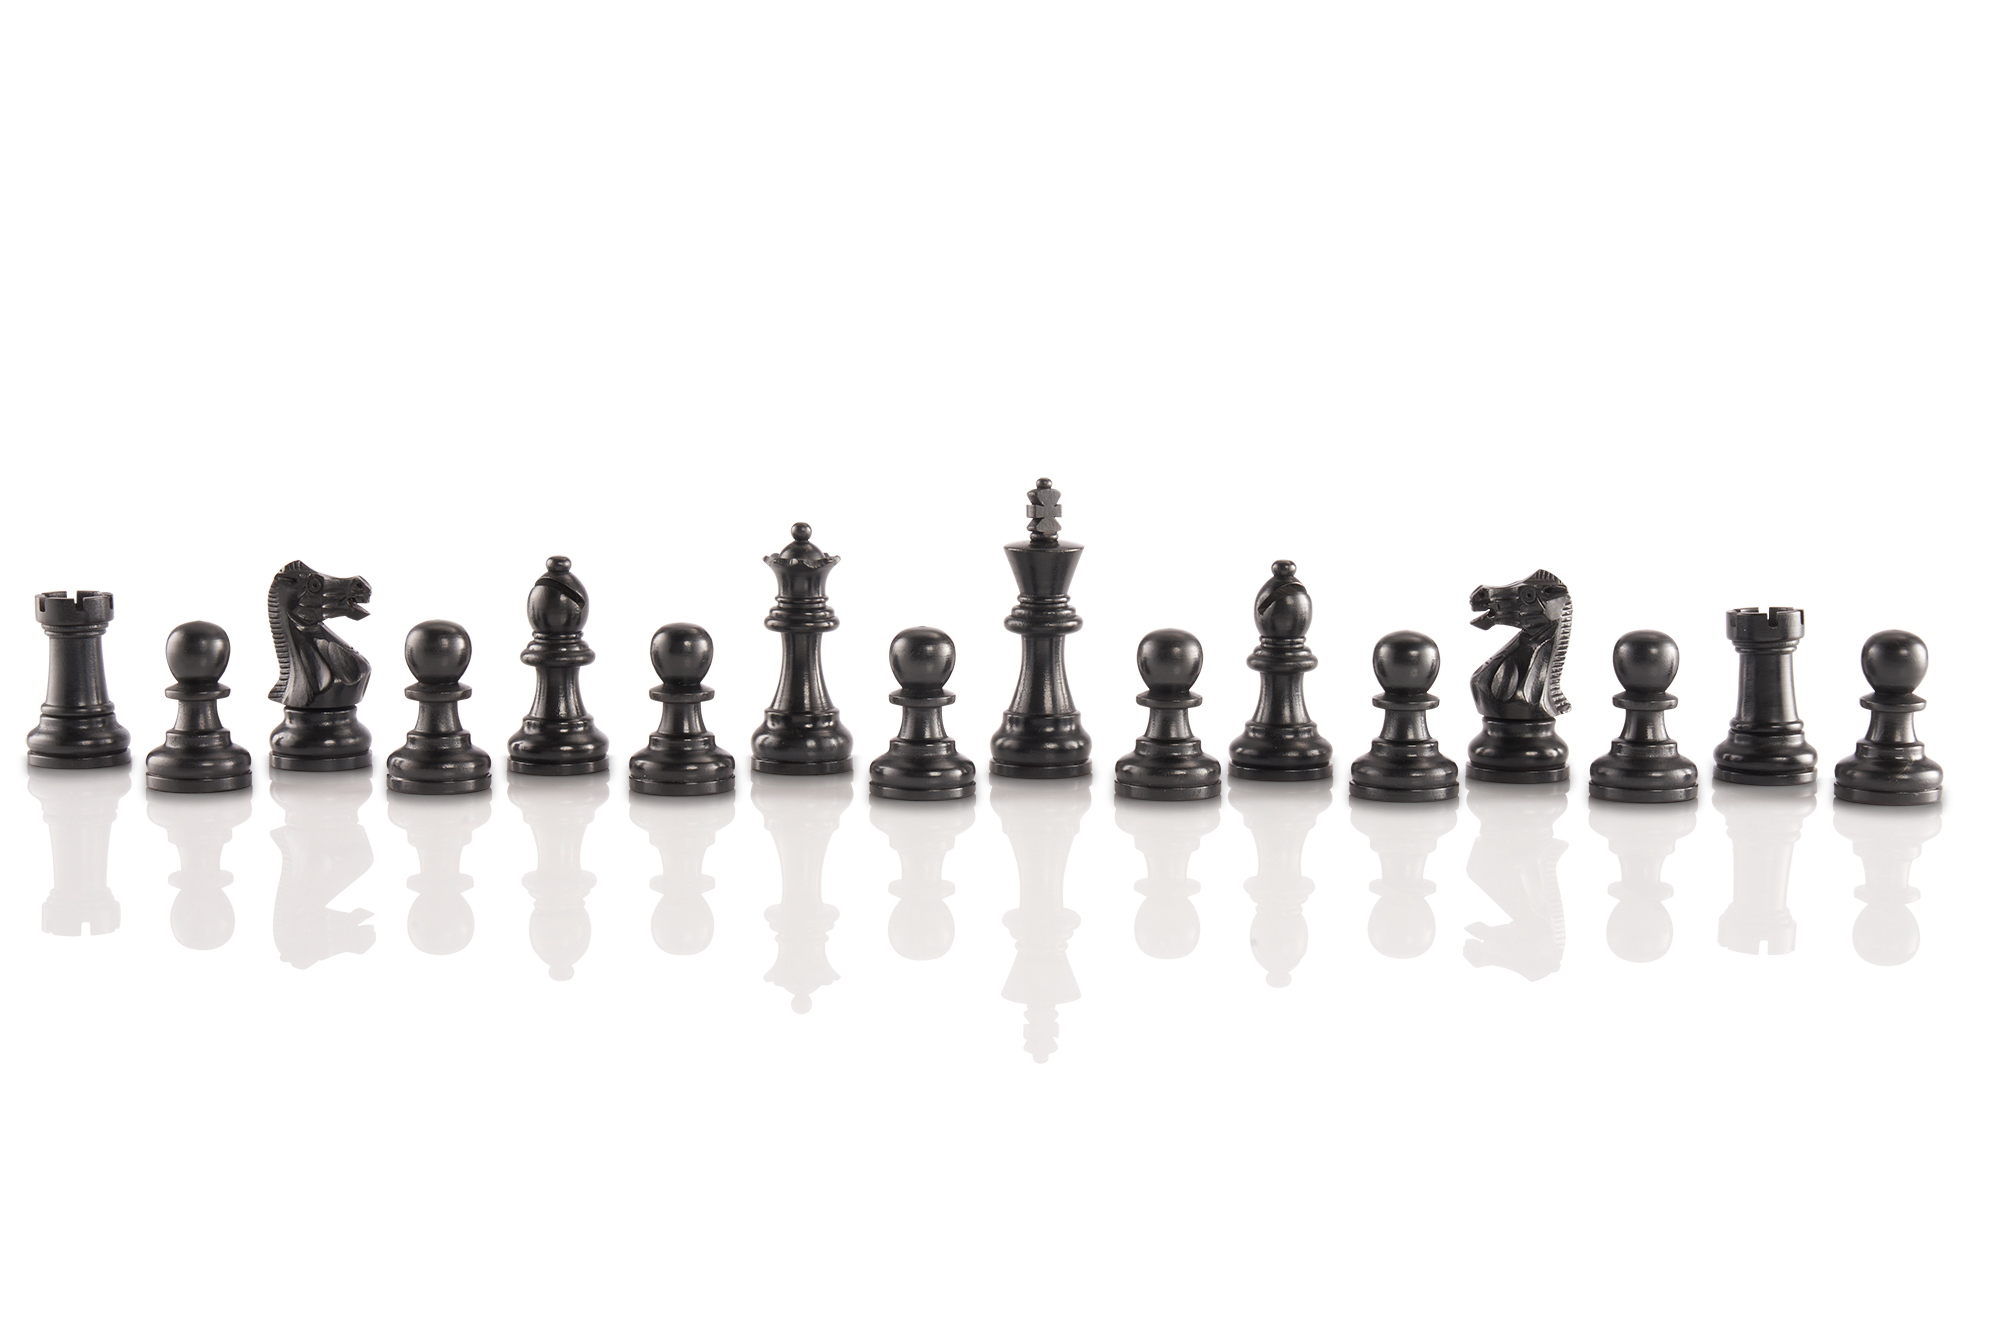 Executive chess piece set for 40 cm Exclusive chessboards